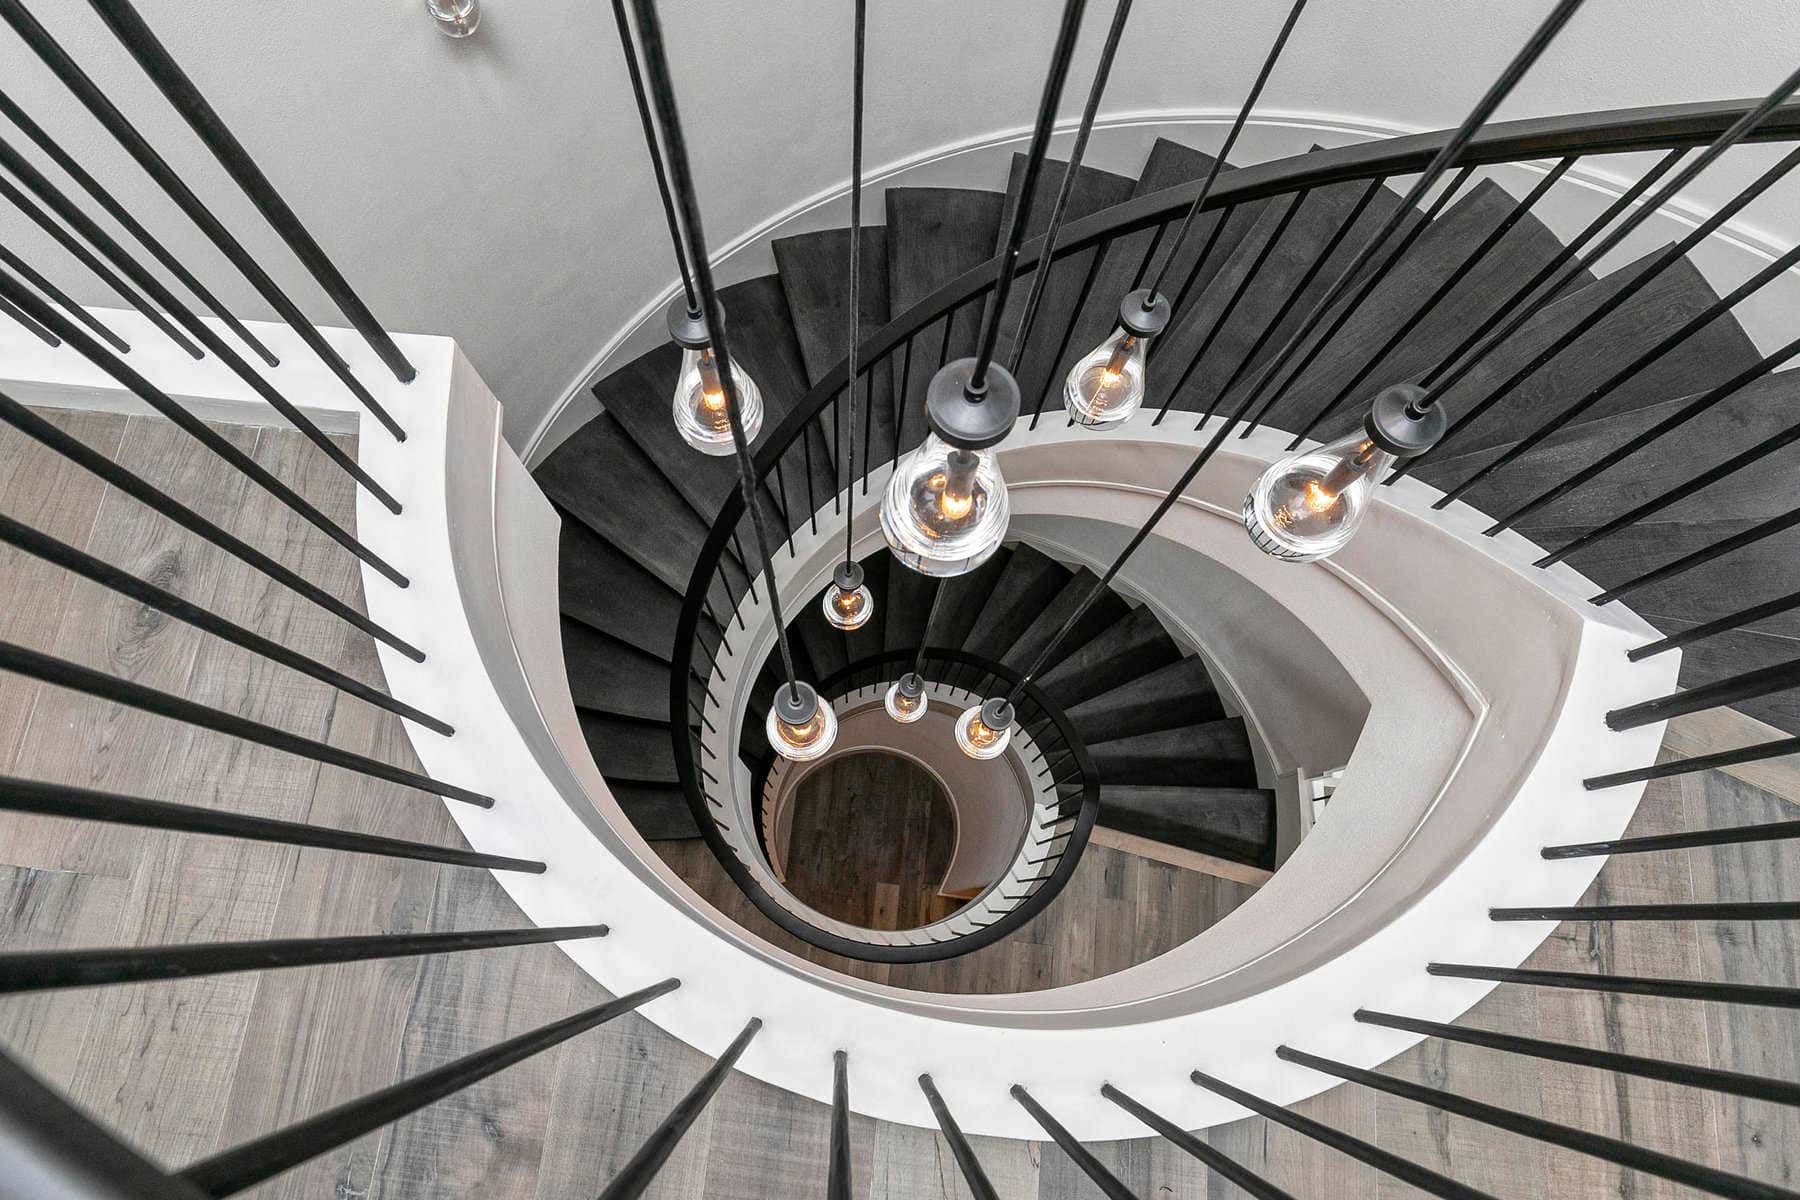 Aesthetically pleasing structure of a white circular stairwell with long light fixtures